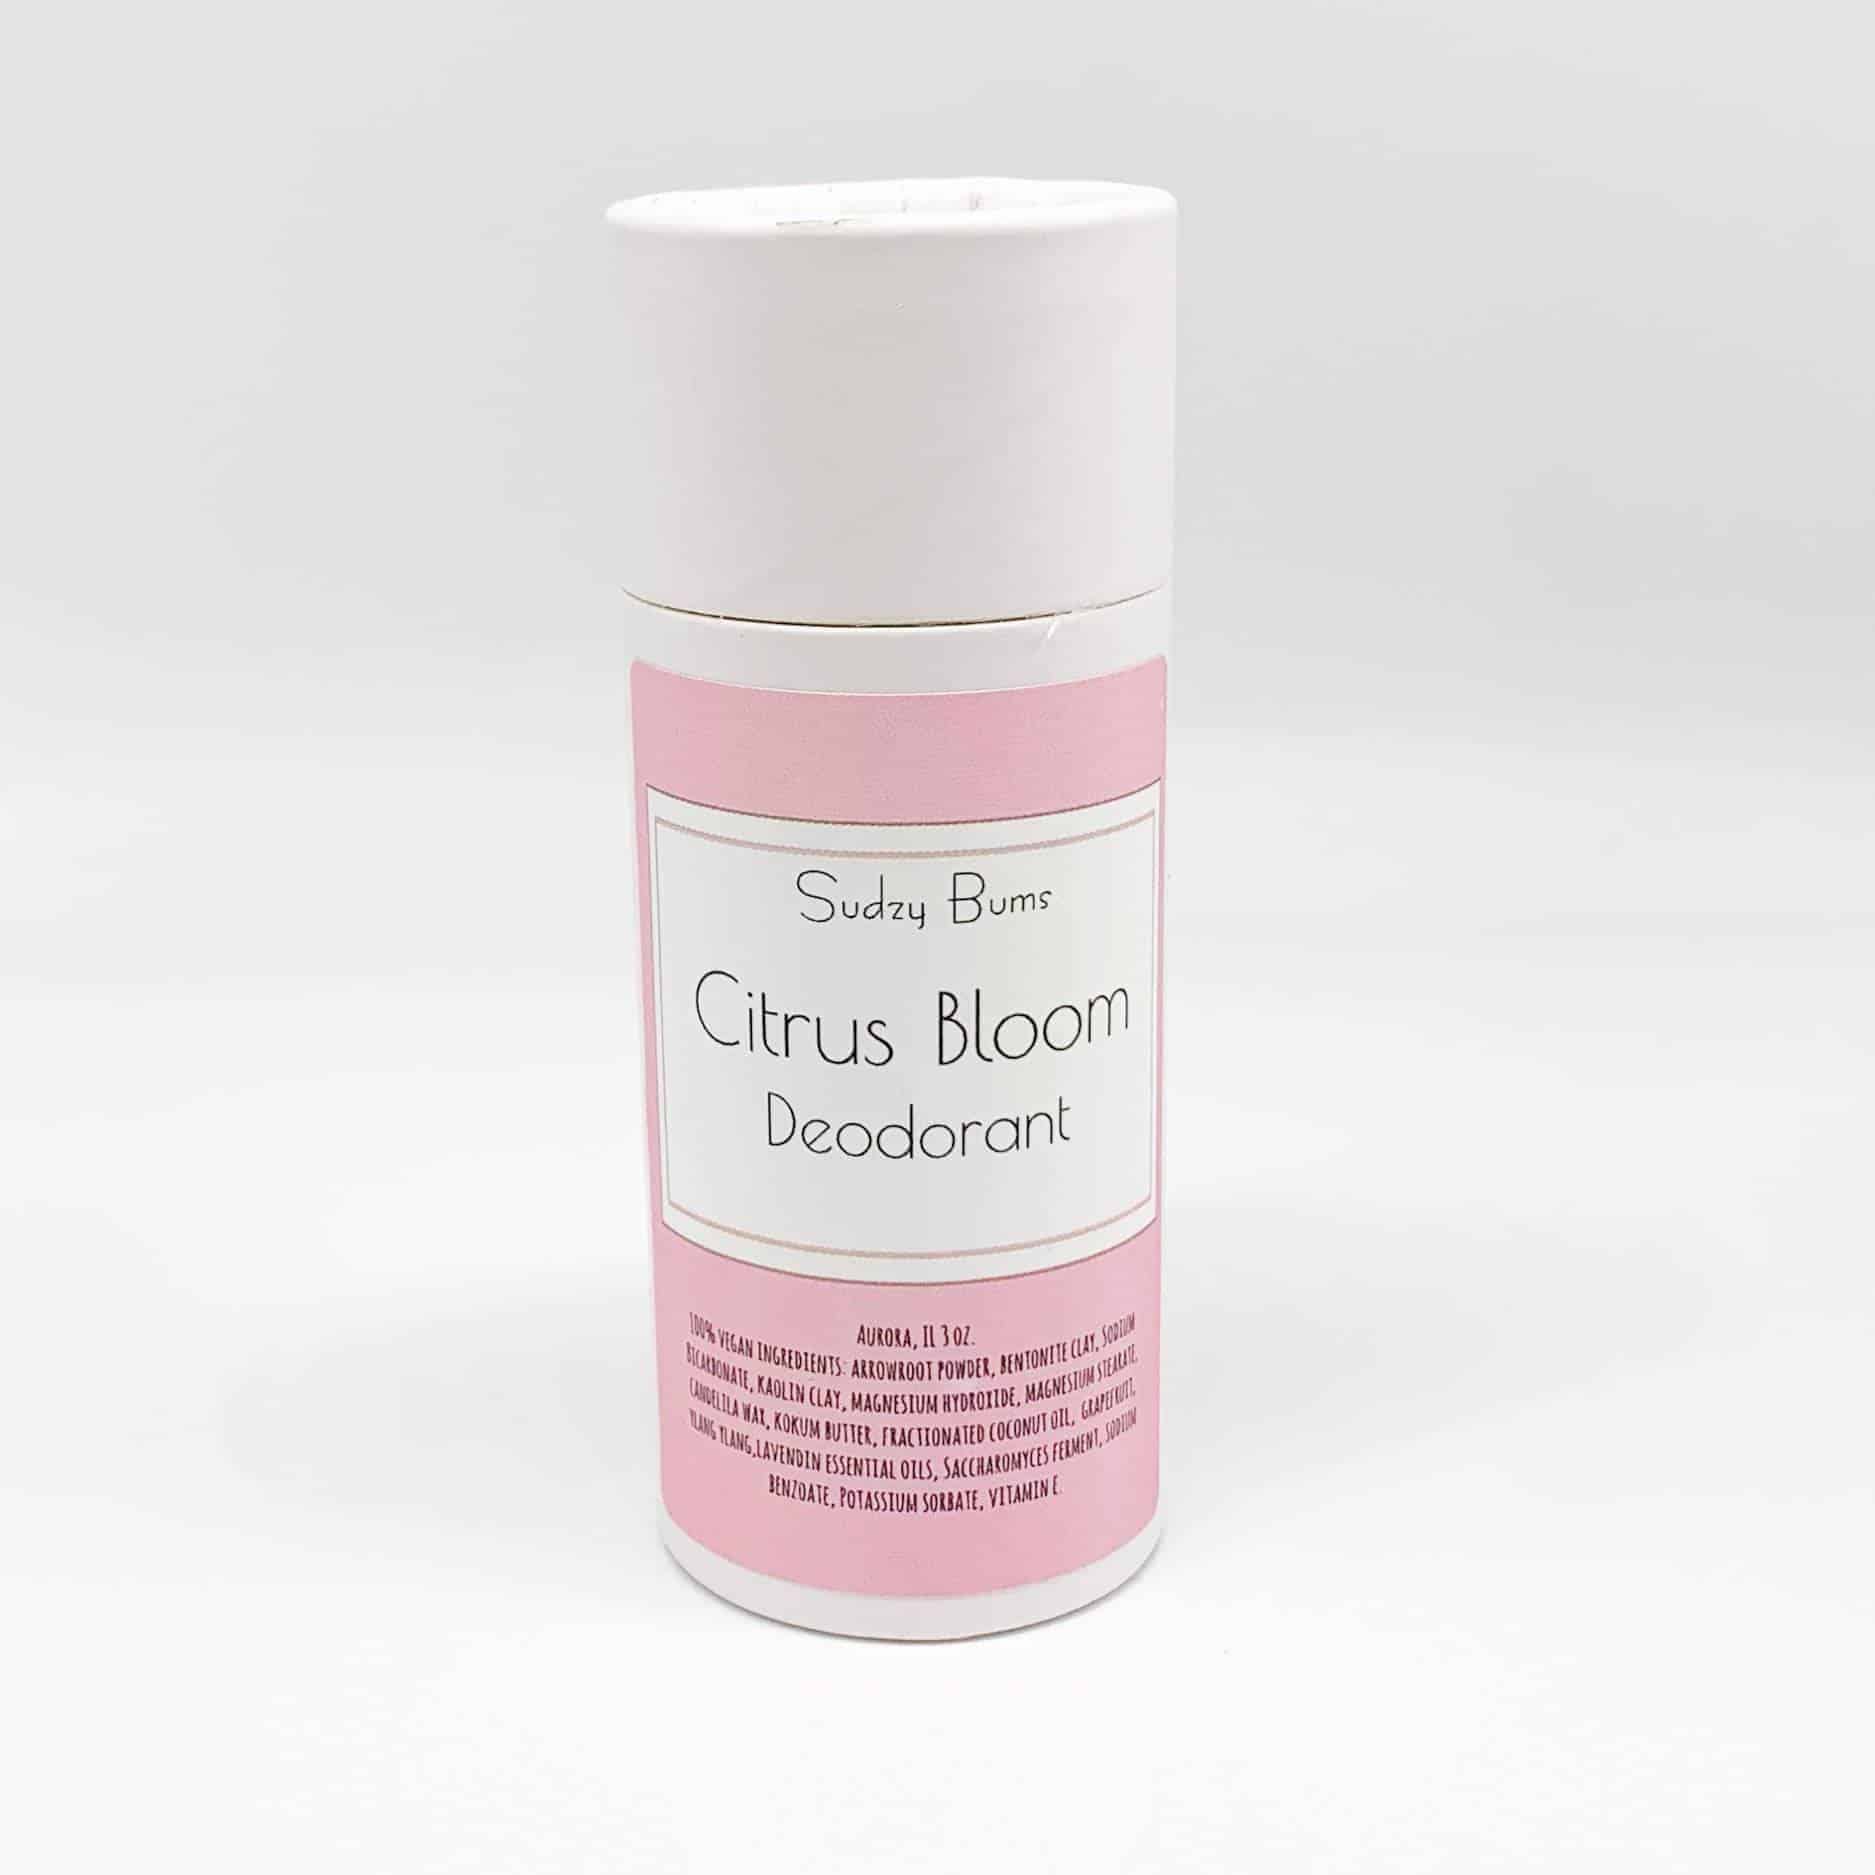 This Vegan Natural Deodorant is made with love by Sudzy Bums! Shop more unique gift ideas today with Spots Initiatives, the best way to support creators.